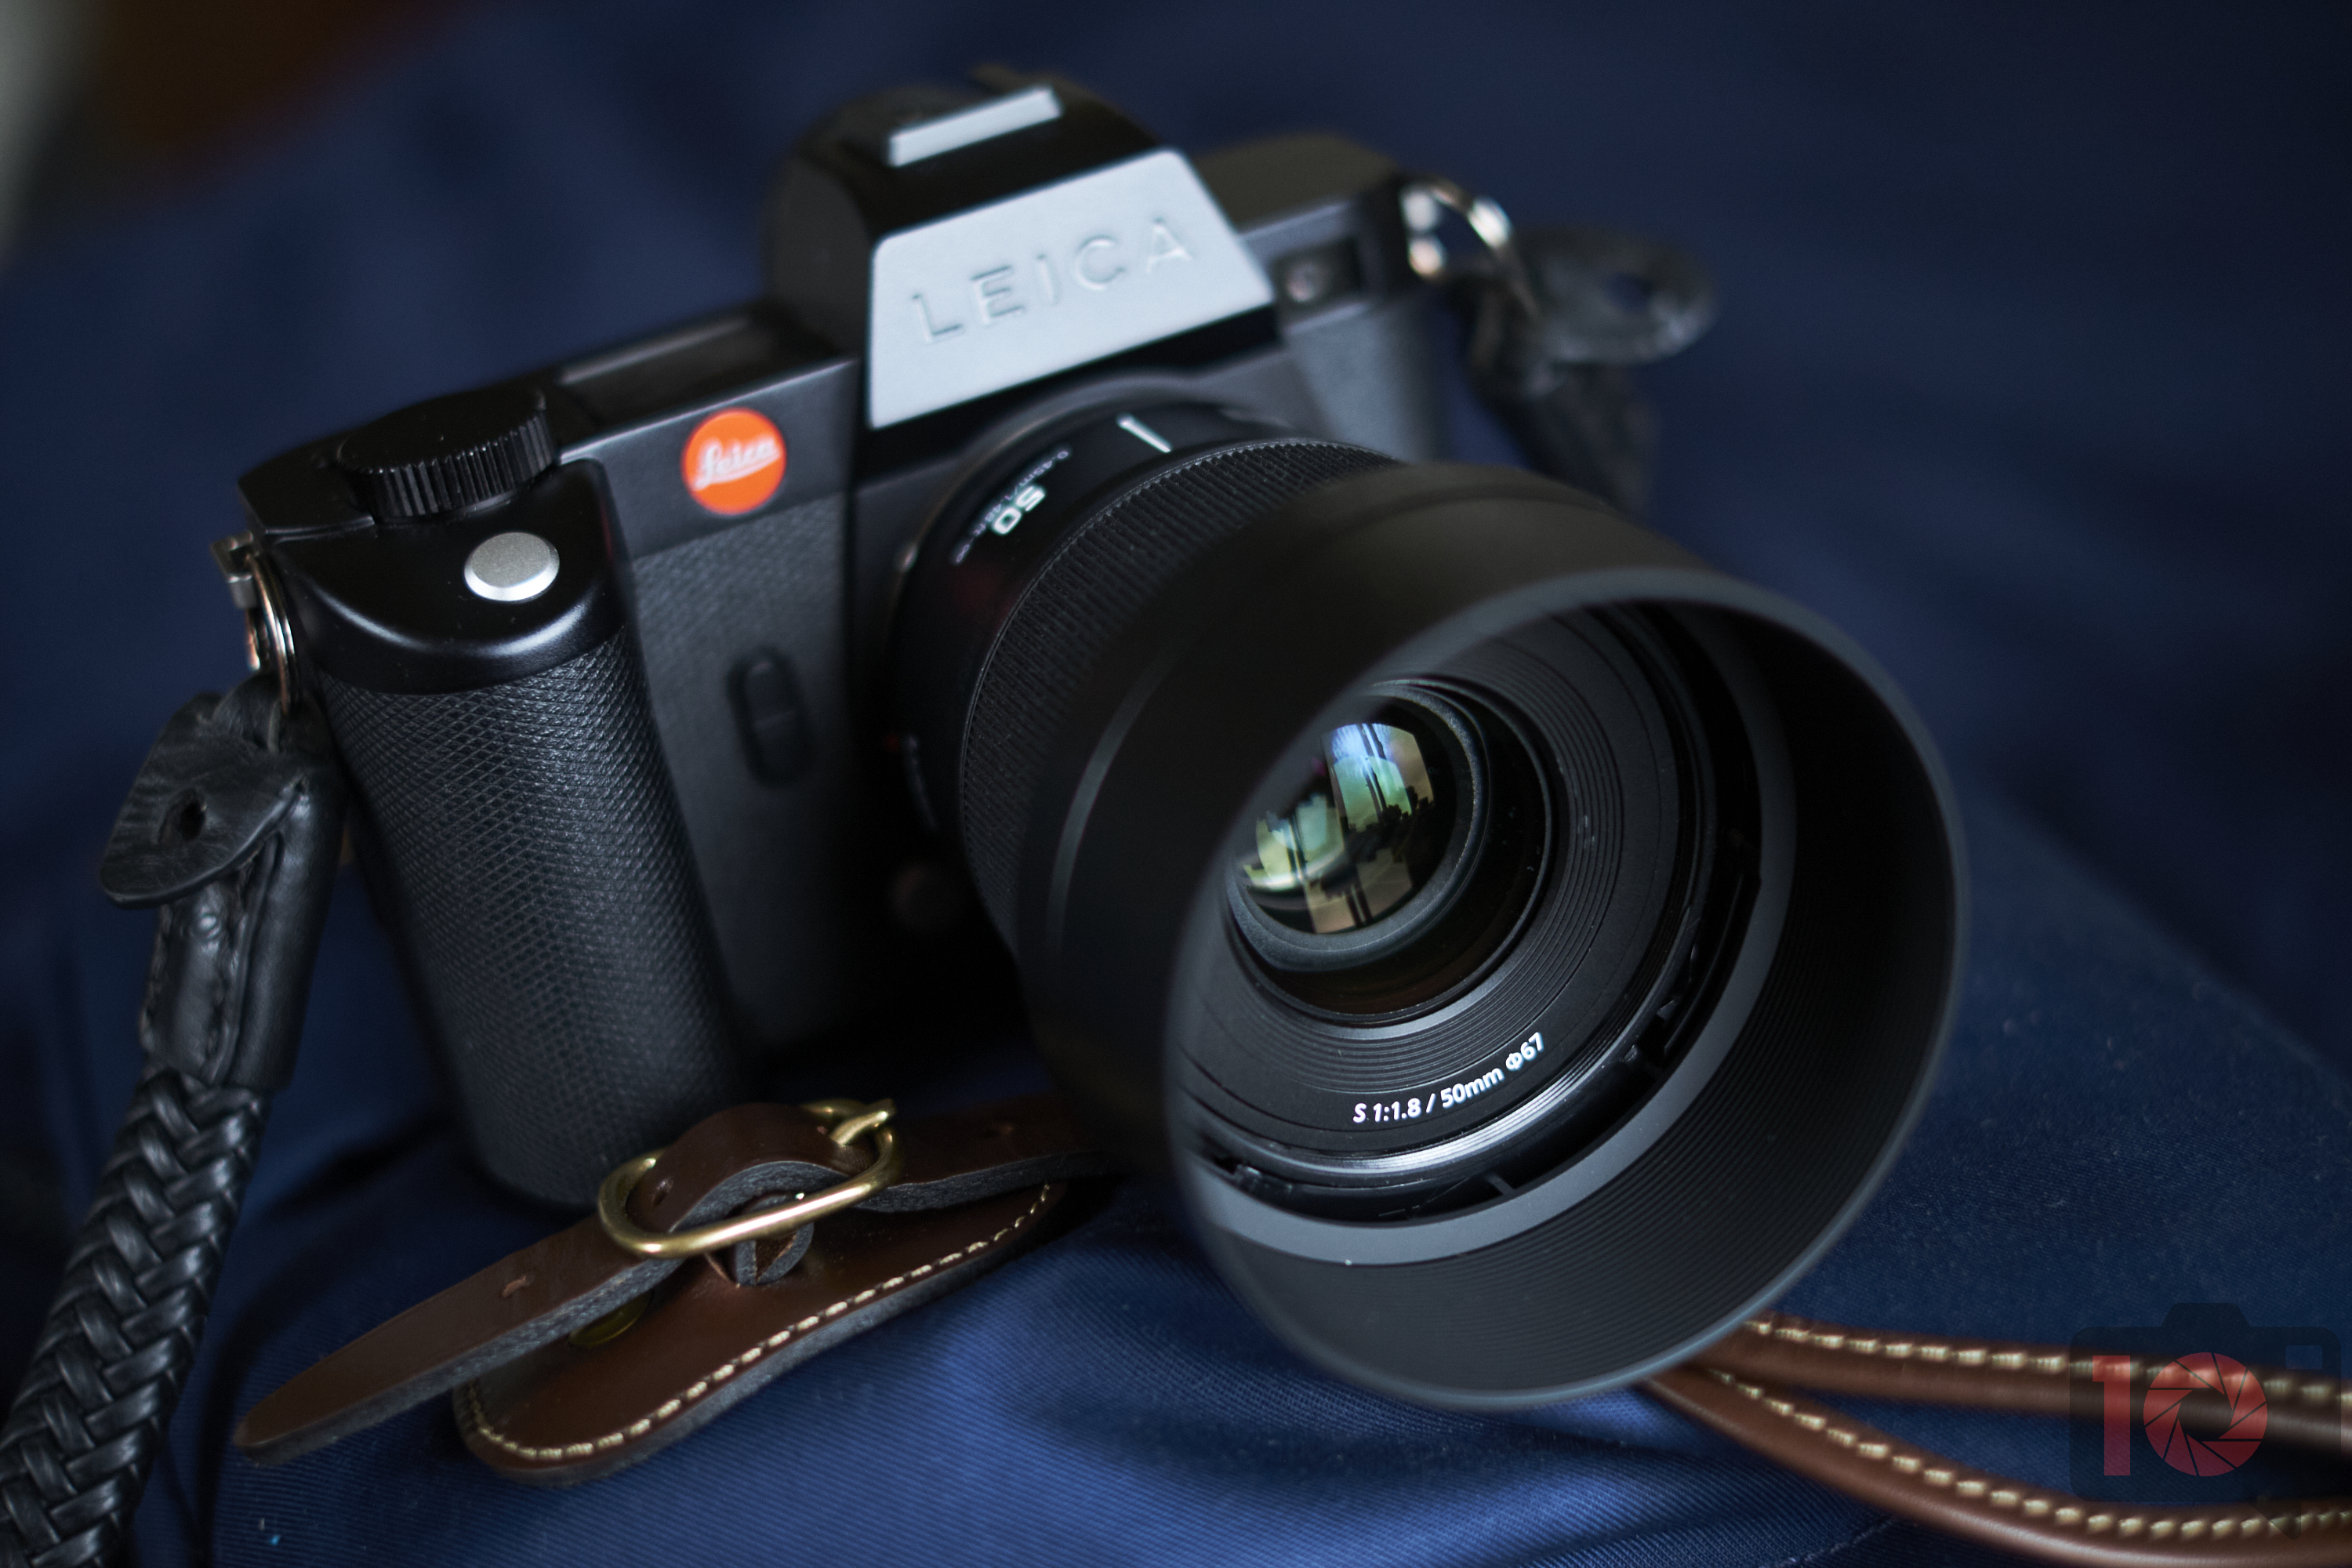 The Best Nifty 50 Made! Panasonic 50mm f1.8 S Review